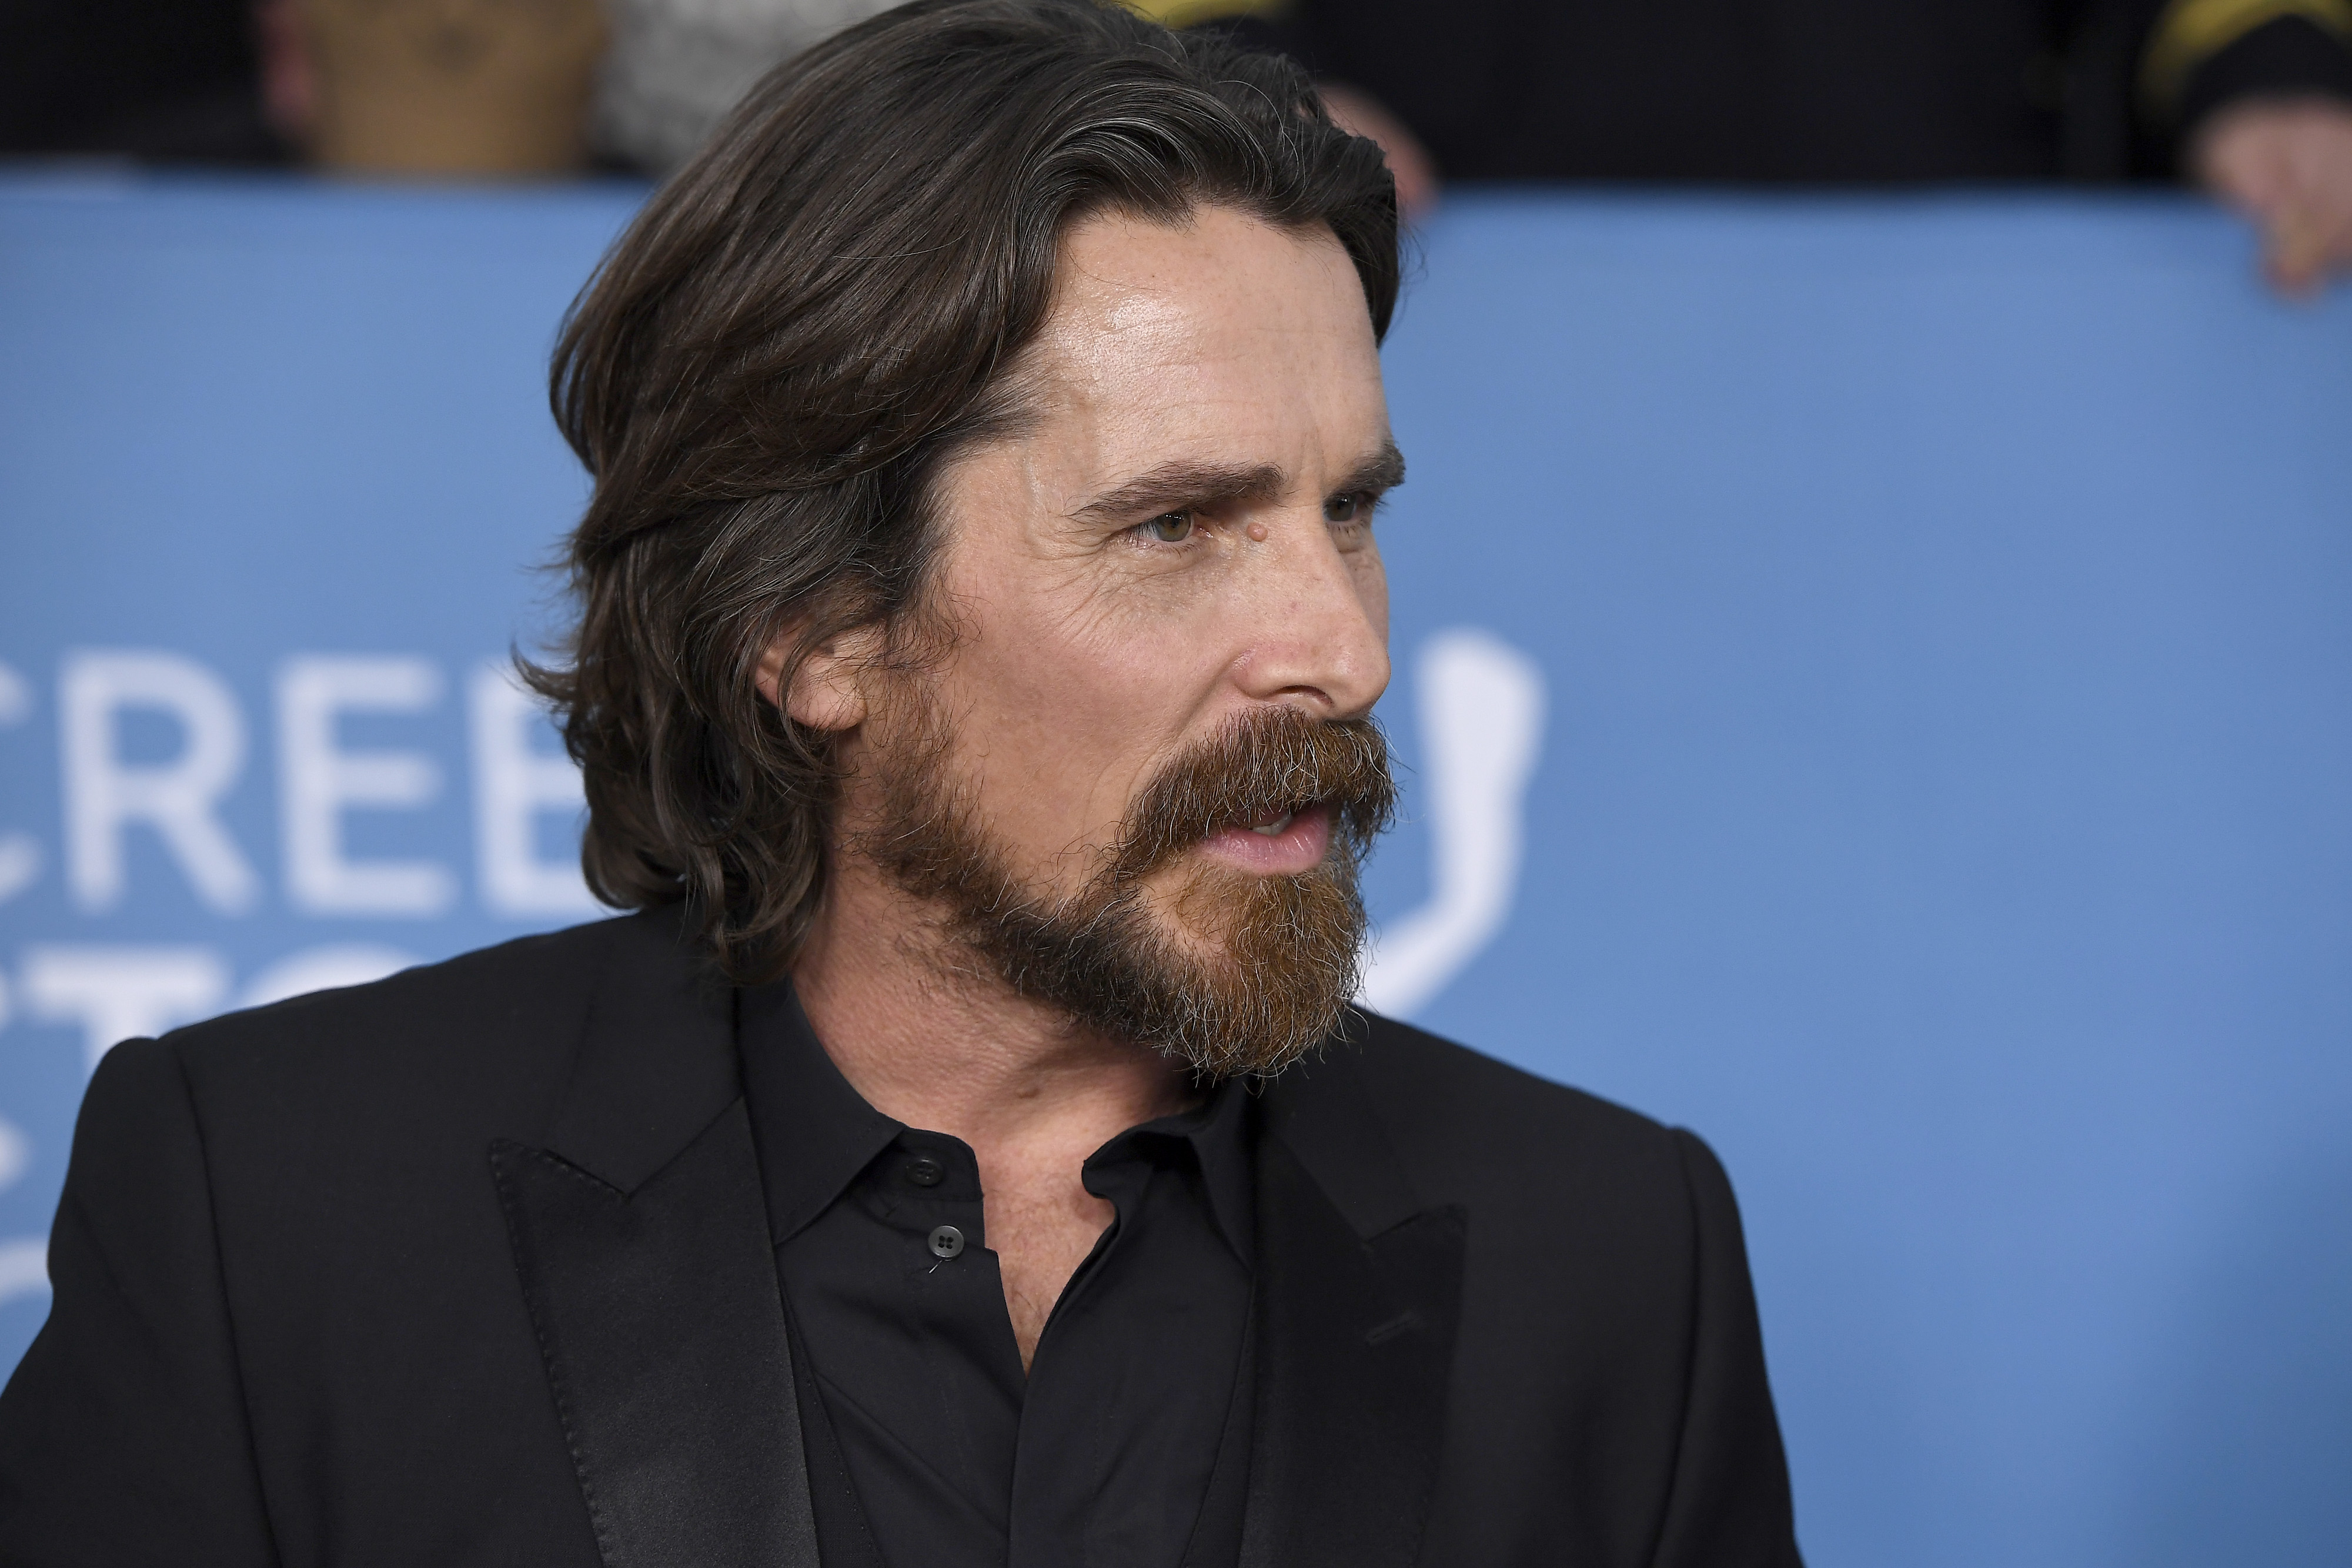 Christian Bale, who stars as Gorr the God Butcher in 'Thor: Love and Thunder,' wears a black suit over a black button-up shirt.